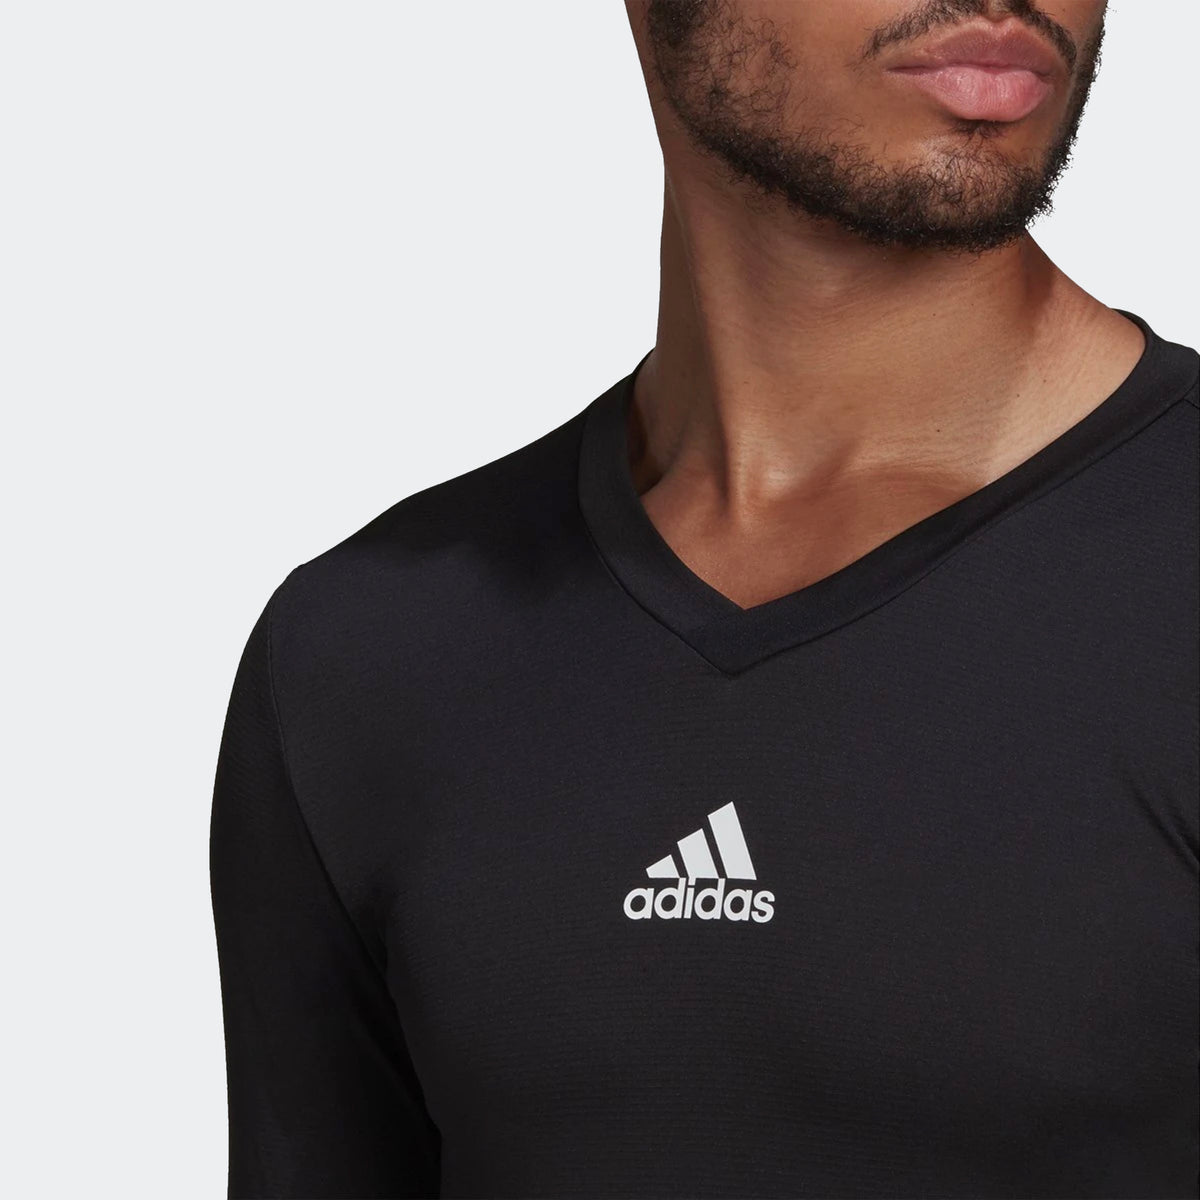 adidas Team Base Long Sleeve Compression Top - Niky's Sports